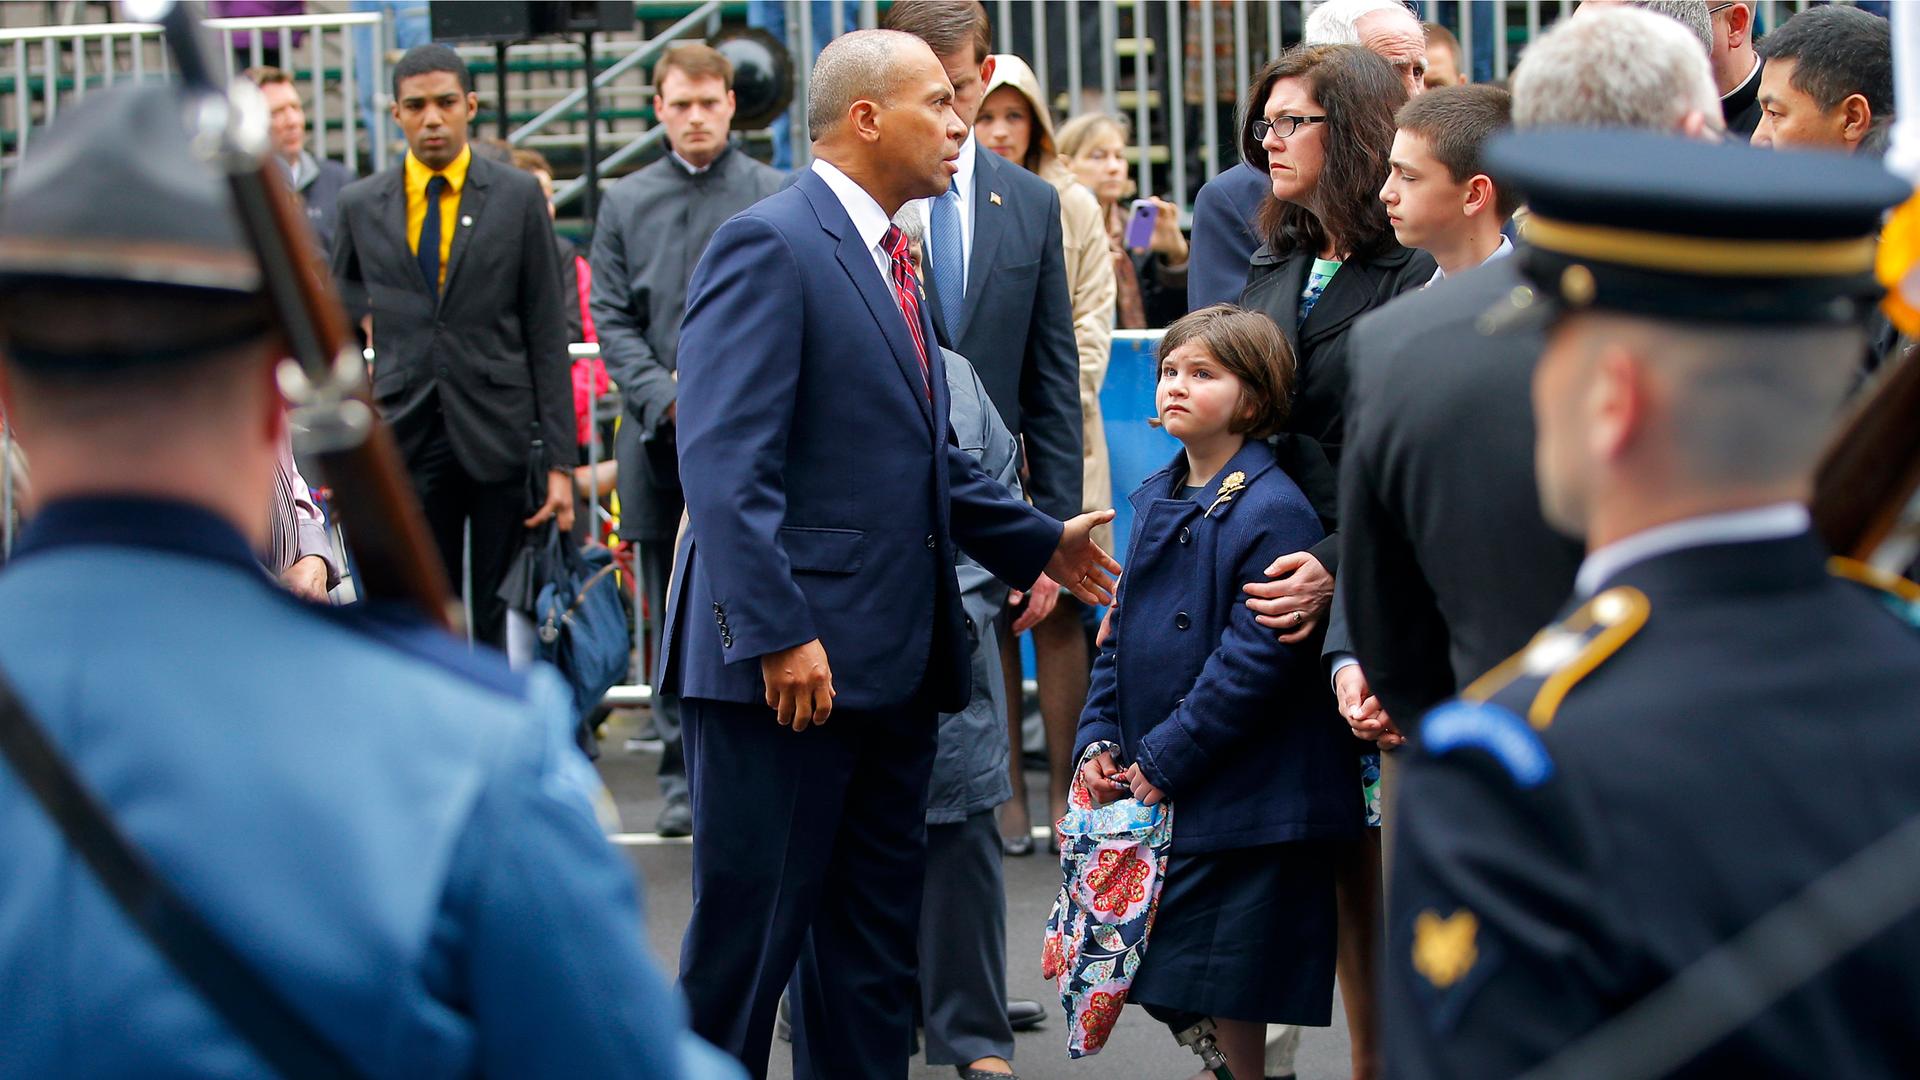 Massachusetts Governor Deval Patrick (C) joins the family of Boston Marathon bombing victim Martin Richard at the finish line for a wreath-laying ceremony in Boston, Massachusetts April 15, 2014. Richard's family members include sister Jane (3rd R), mothe